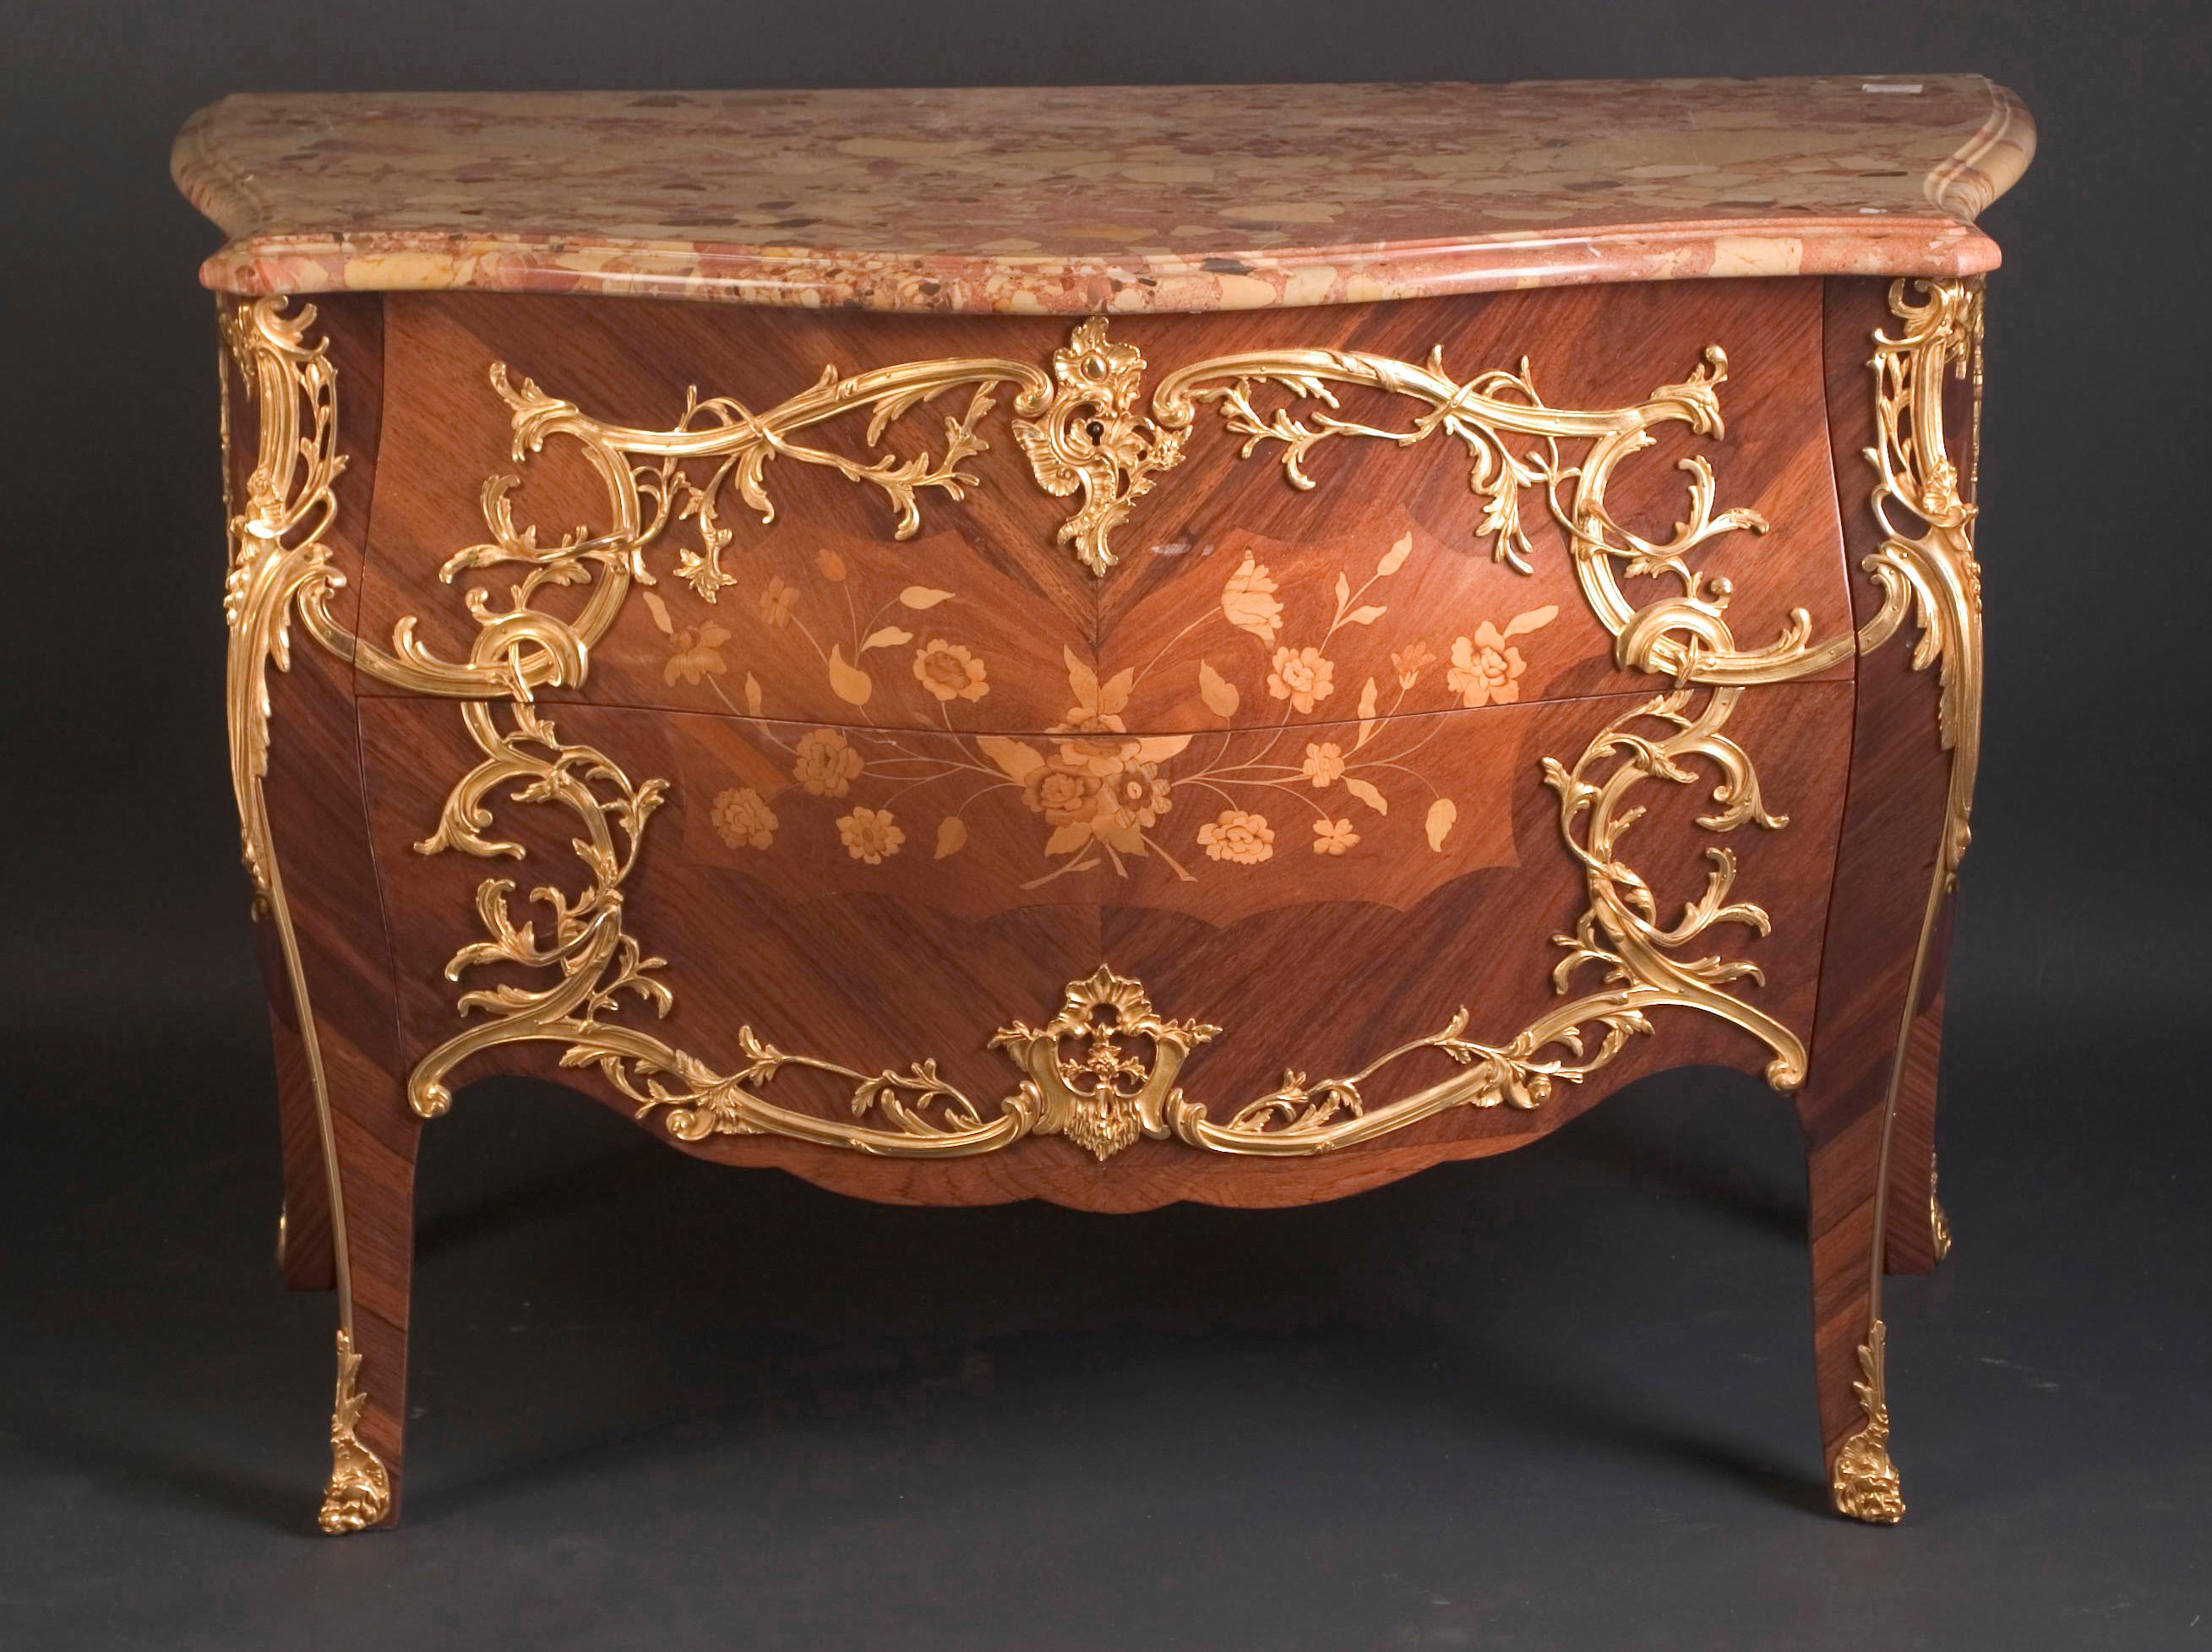 This fantastic Louis XV two drawer Bombé commode features finely chased bronze d’ore mounts in the floriate manner throughout. The French antique piece dates back to the 19th century, circa 1880, and is signed by the artisan “Krieger,” well known